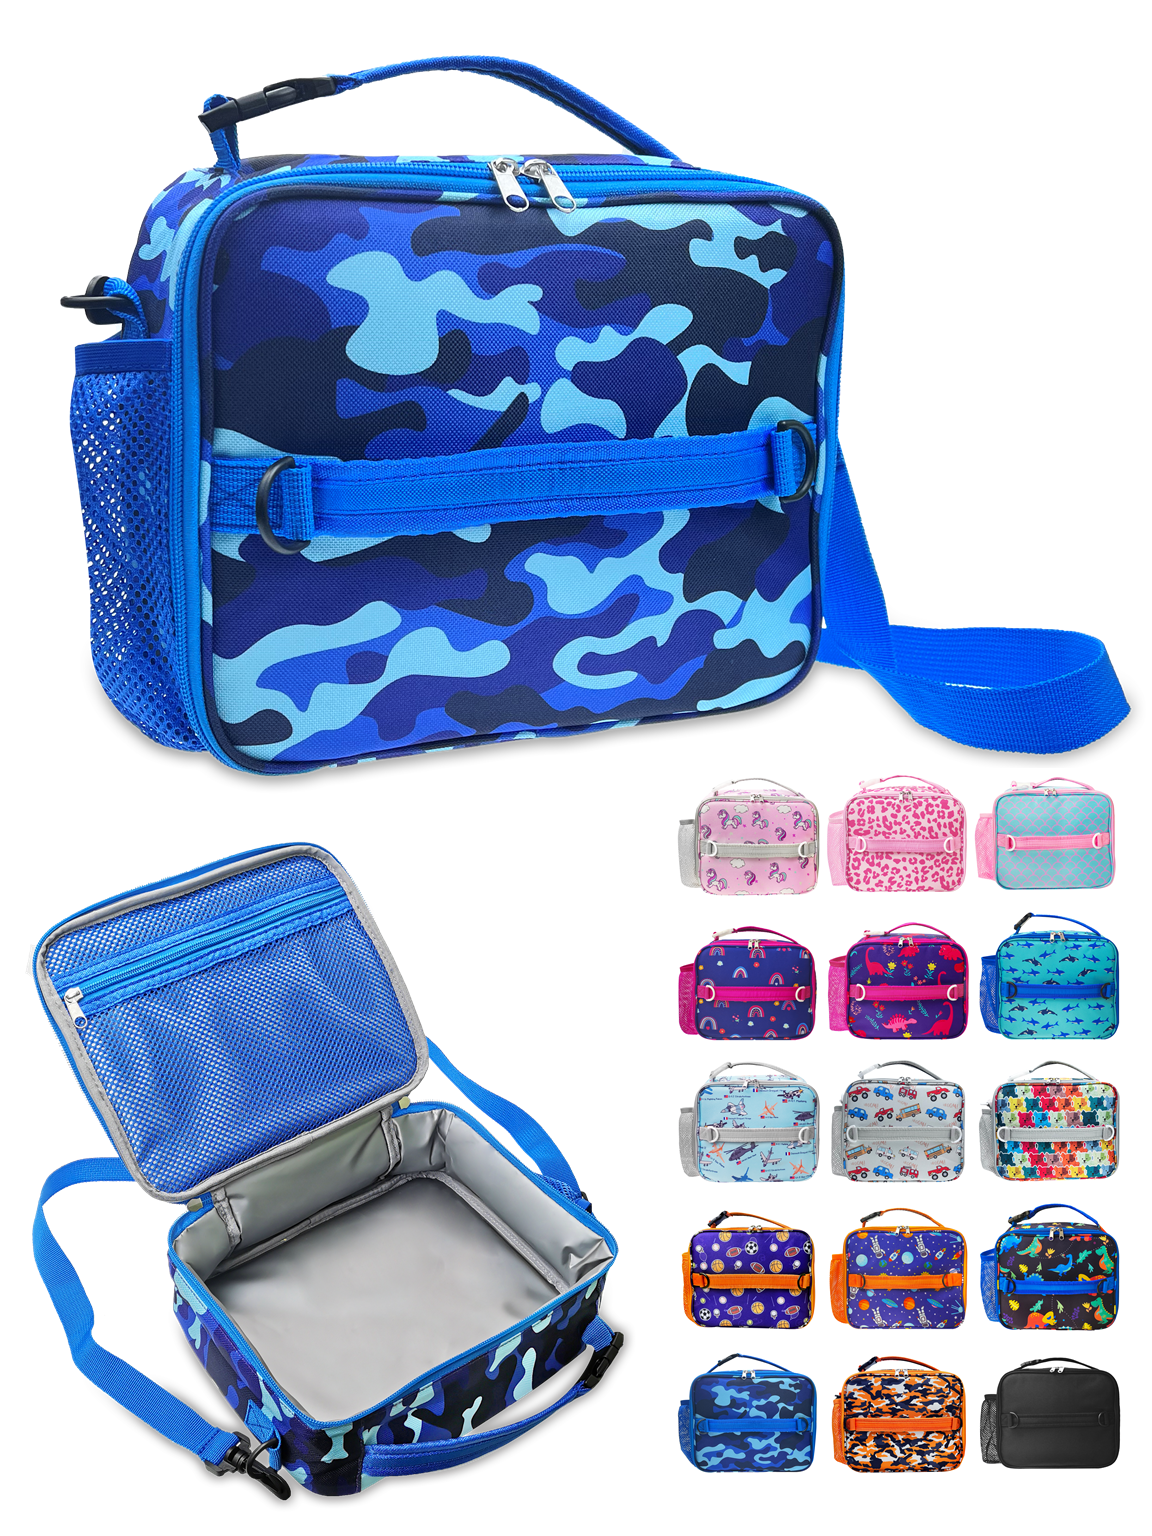 Grusce Kids Lunch Bag,Durable Insulated School Lunch Box with Shoulder Strap and Bottle Holder,Water-Resistant Thermal Small Lunch Cooler Tote for